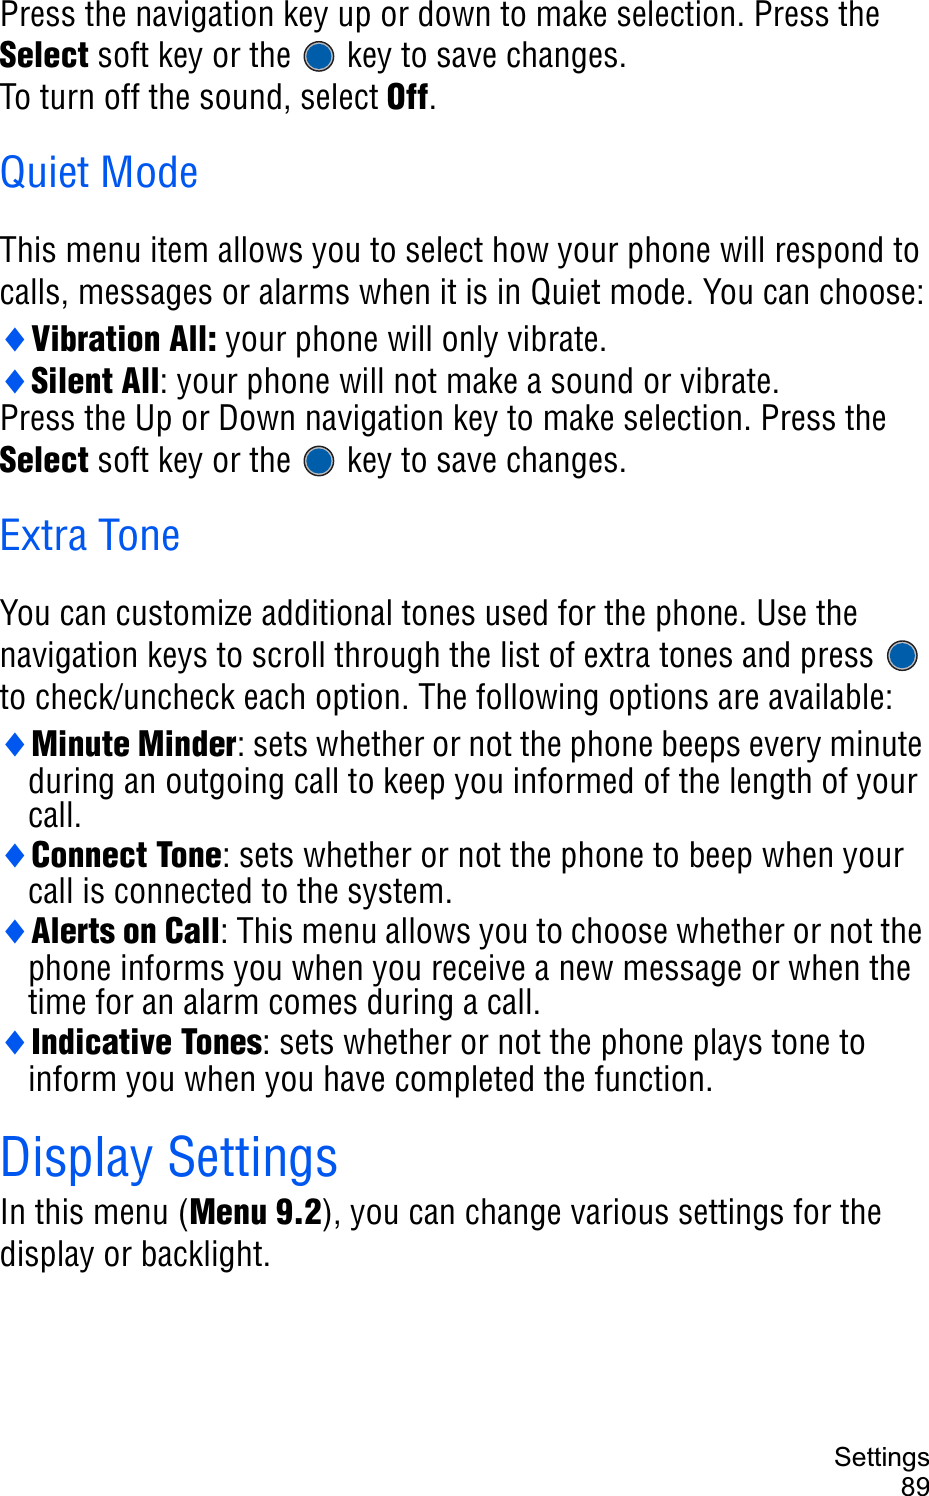 Settings89Press the navigation key up or down to make selection. Press the Select soft key or the   key to save changes.To turn off the sound, select Off.Quiet ModeThis menu item allows you to select how your phone will respond to calls, messages or alarms when it is in Quiet mode. You can choose:iVibration All: your phone will only vibrate.iSilent All: your phone will not make a sound or vibrate.Press the Up or Down navigation key to make selection. Press the Select soft key or the   key to save changes.Extra ToneYou can customize additional tones used for the phone. Use the navigation keys to scroll through the list of extra tones and press   to check/uncheck each option. The following options are available:iMinute Minder: sets whether or not the phone beeps every minute during an outgoing call to keep you informed of the length of your call.iConnect Tone: sets whether or not the phone to beep when your call is connected to the system.iAlerts on Call: This menu allows you to choose whether or not the phone informs you when you receive a new message or when the time for an alarm comes during a call.iIndicative Tones: sets whether or not the phone plays tone to inform you when you have completed the function. Display SettingsIn this menu (Menu 9.2), you can change various settings for the display or backlight.